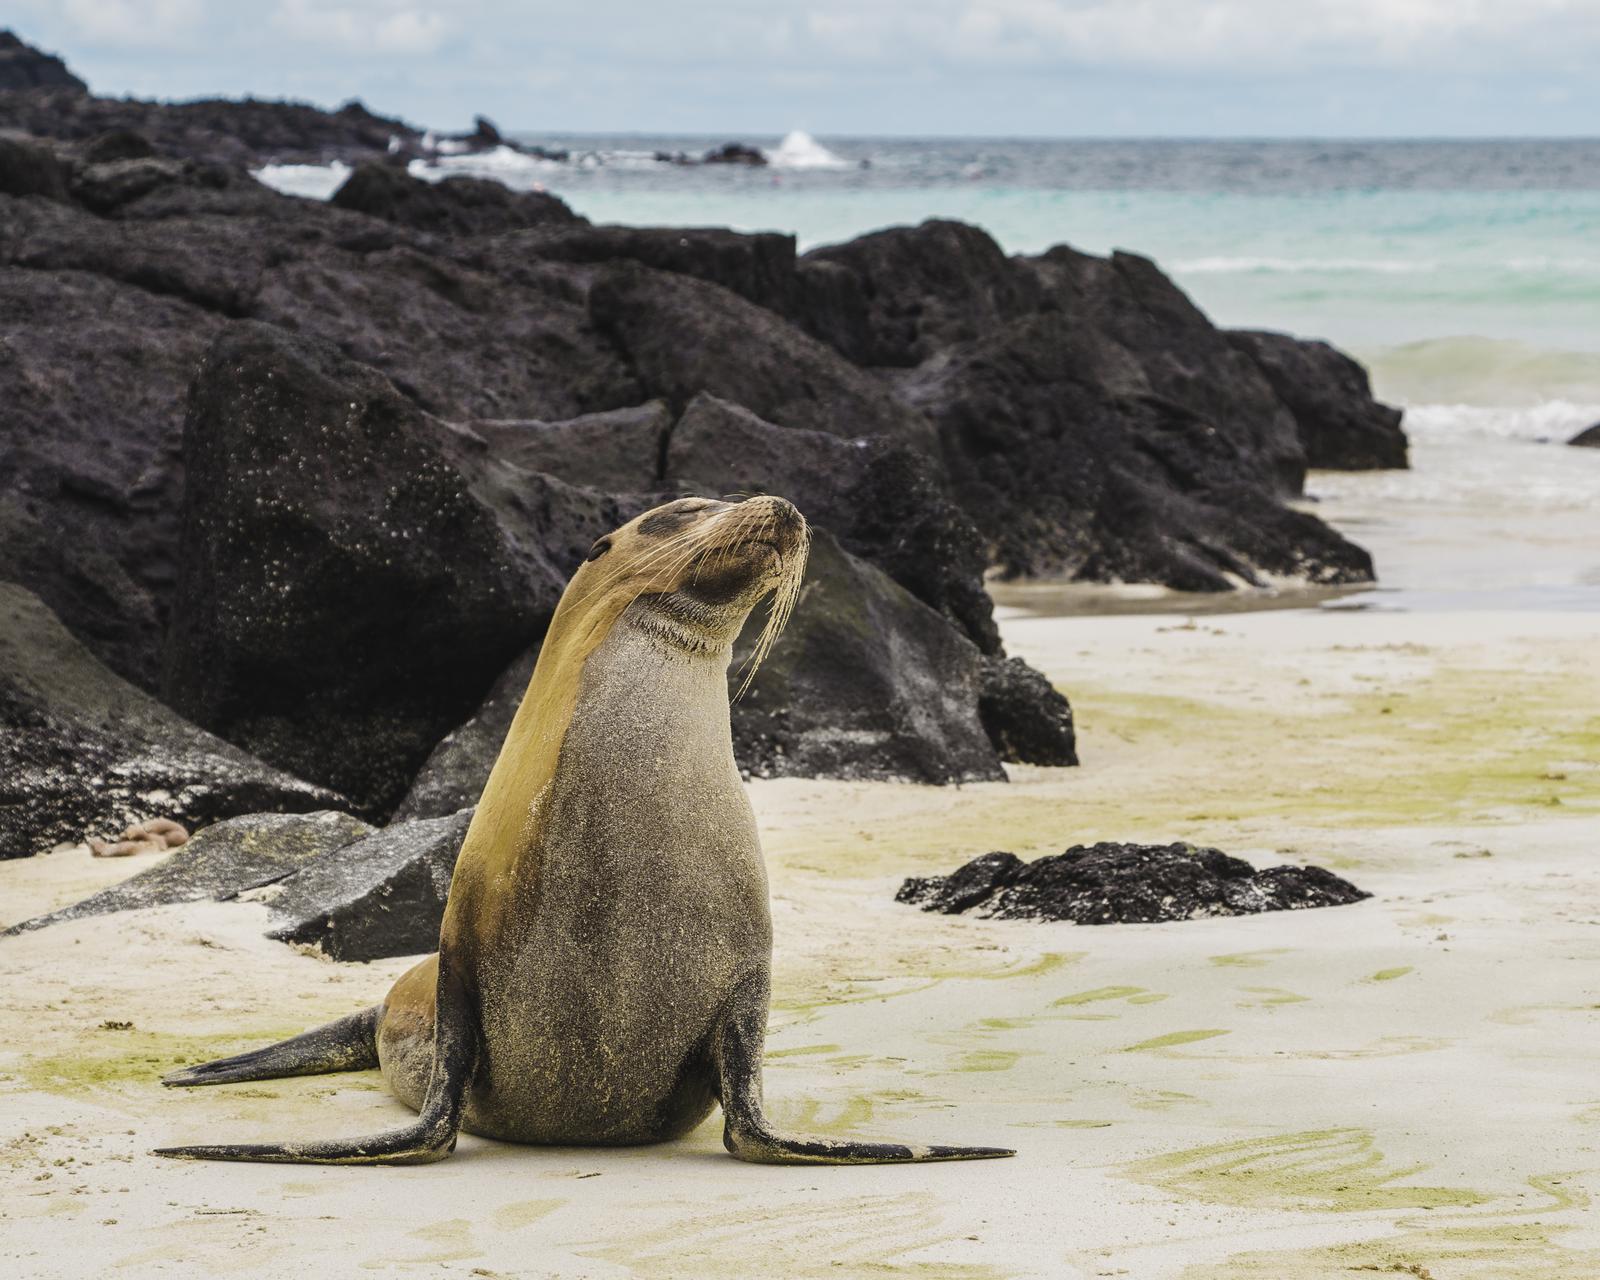 We’ll Give You an 🌮 International Food to Try Based on the ✈️ Places You Would Rather Visit Galapagos Islands